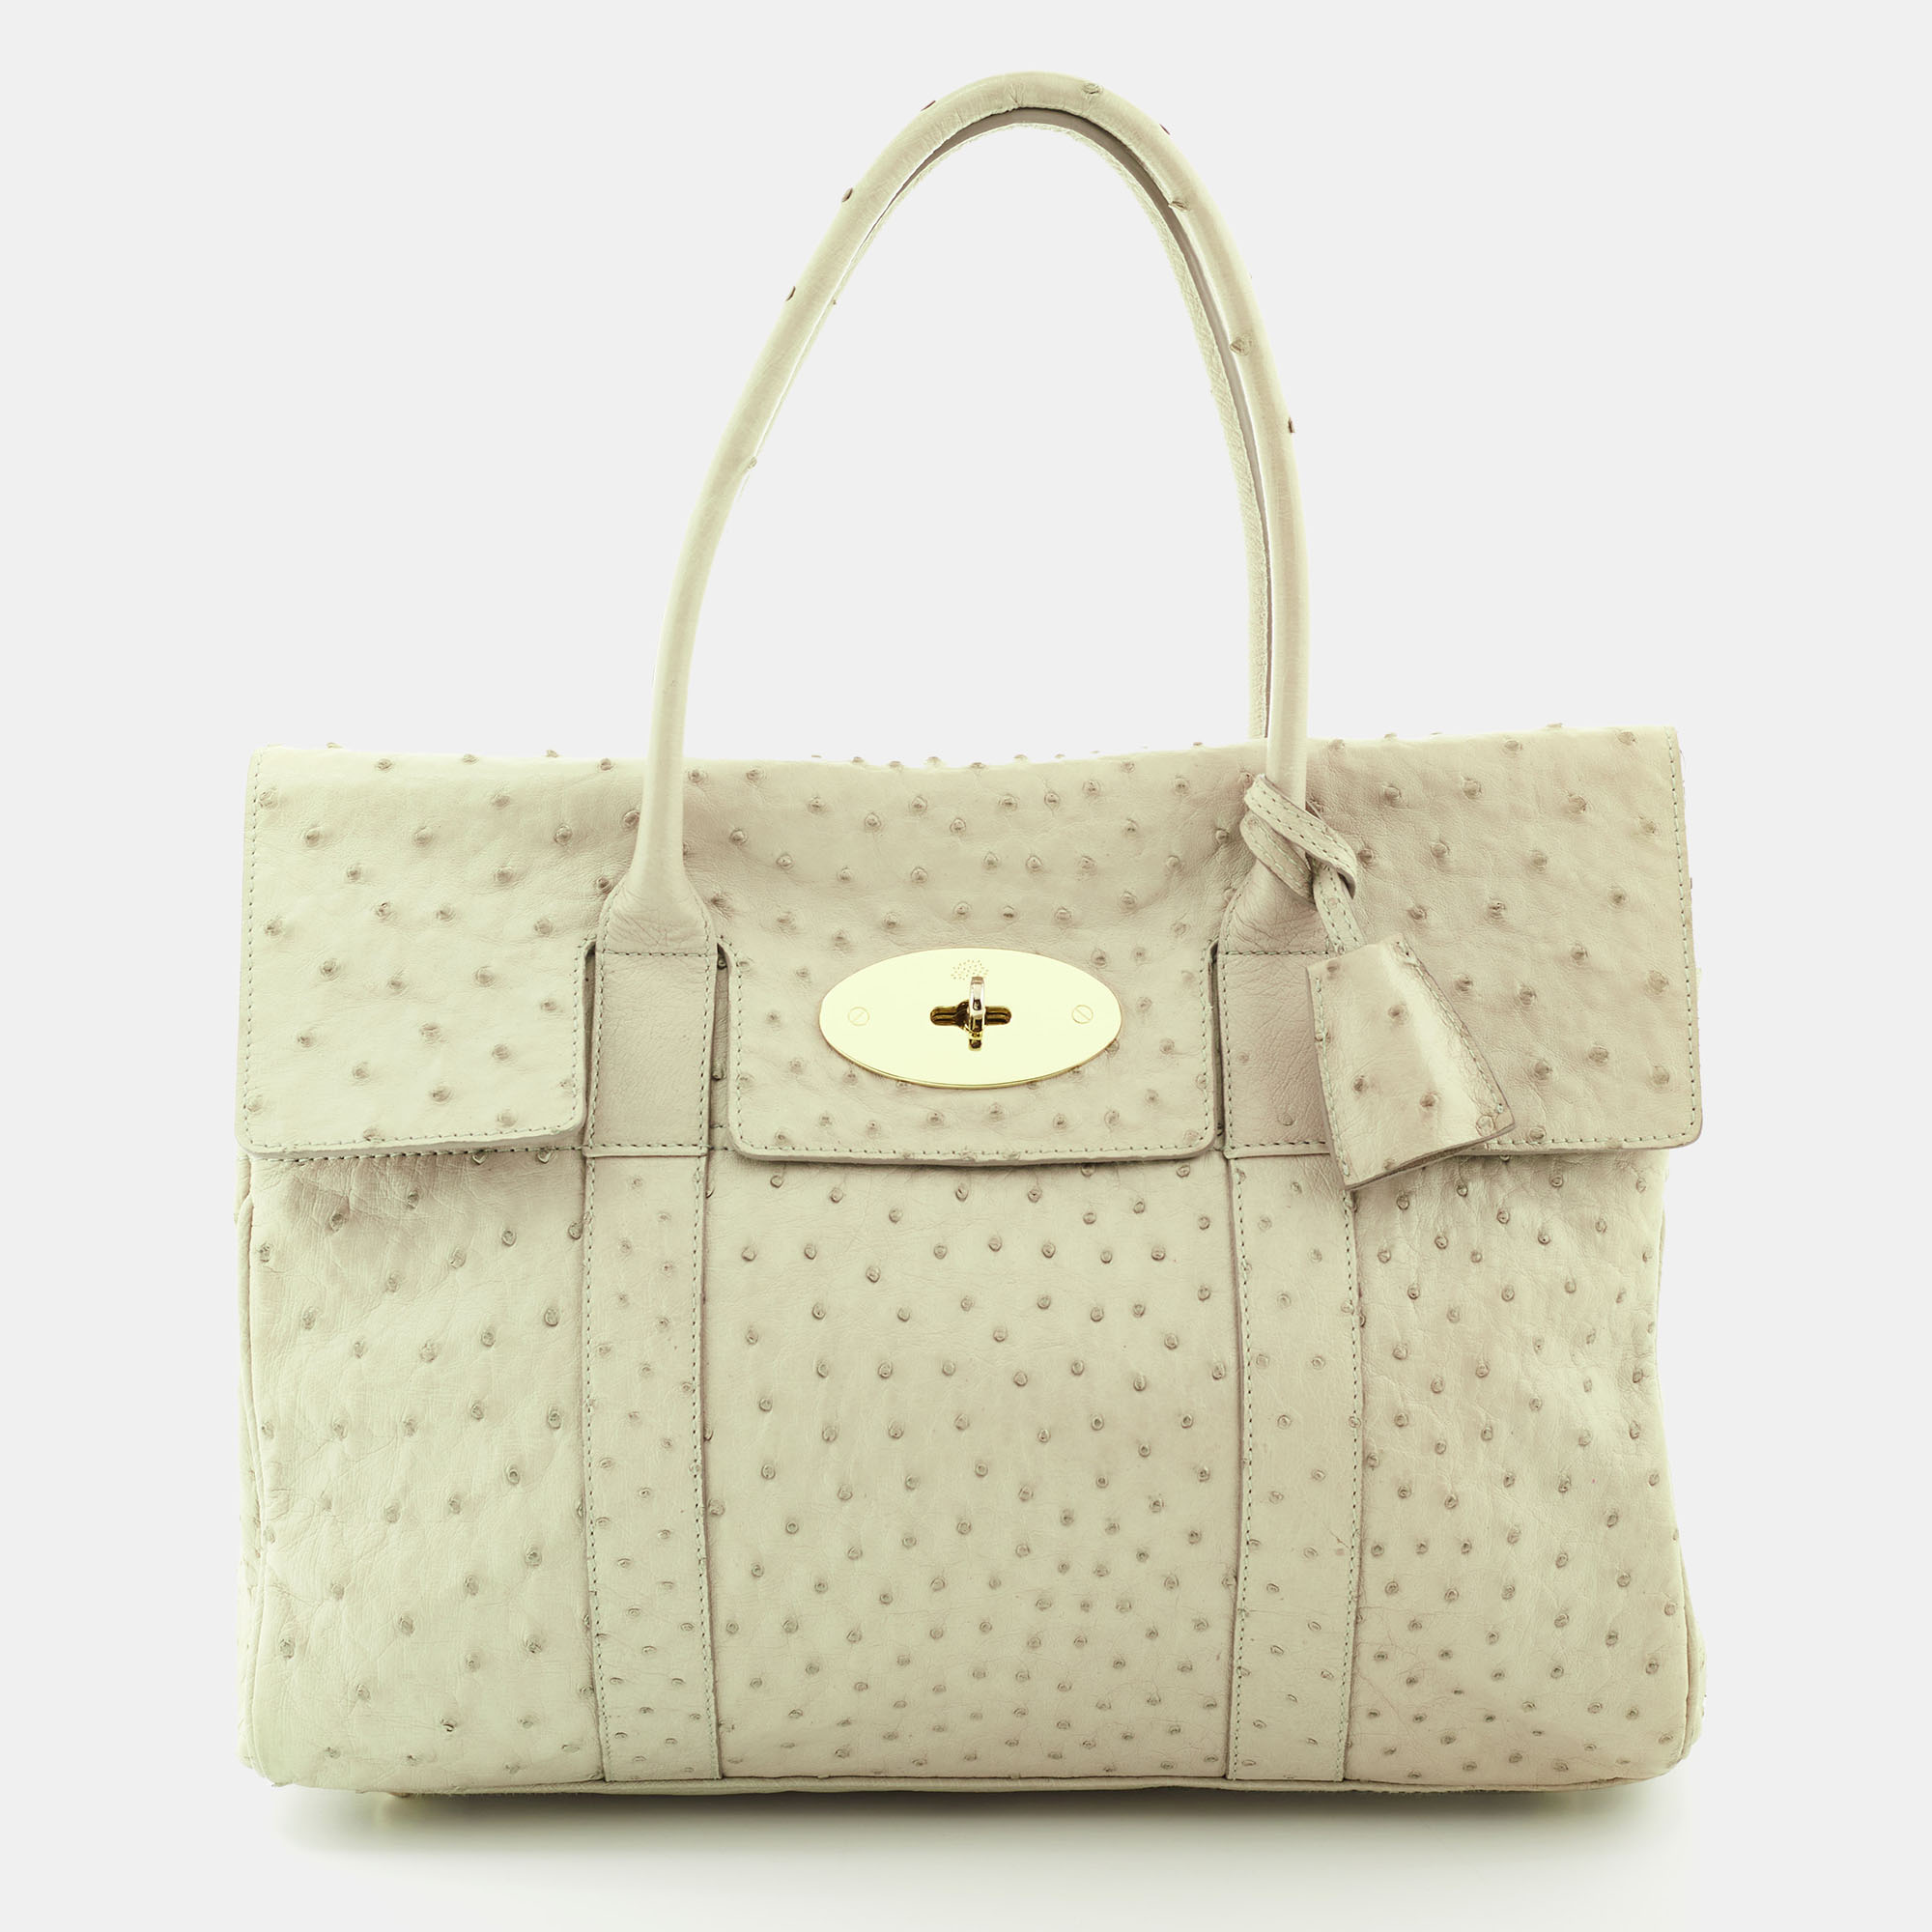 Pre-owned Mulberry Pale Green Ostrich Bayswater Satchel